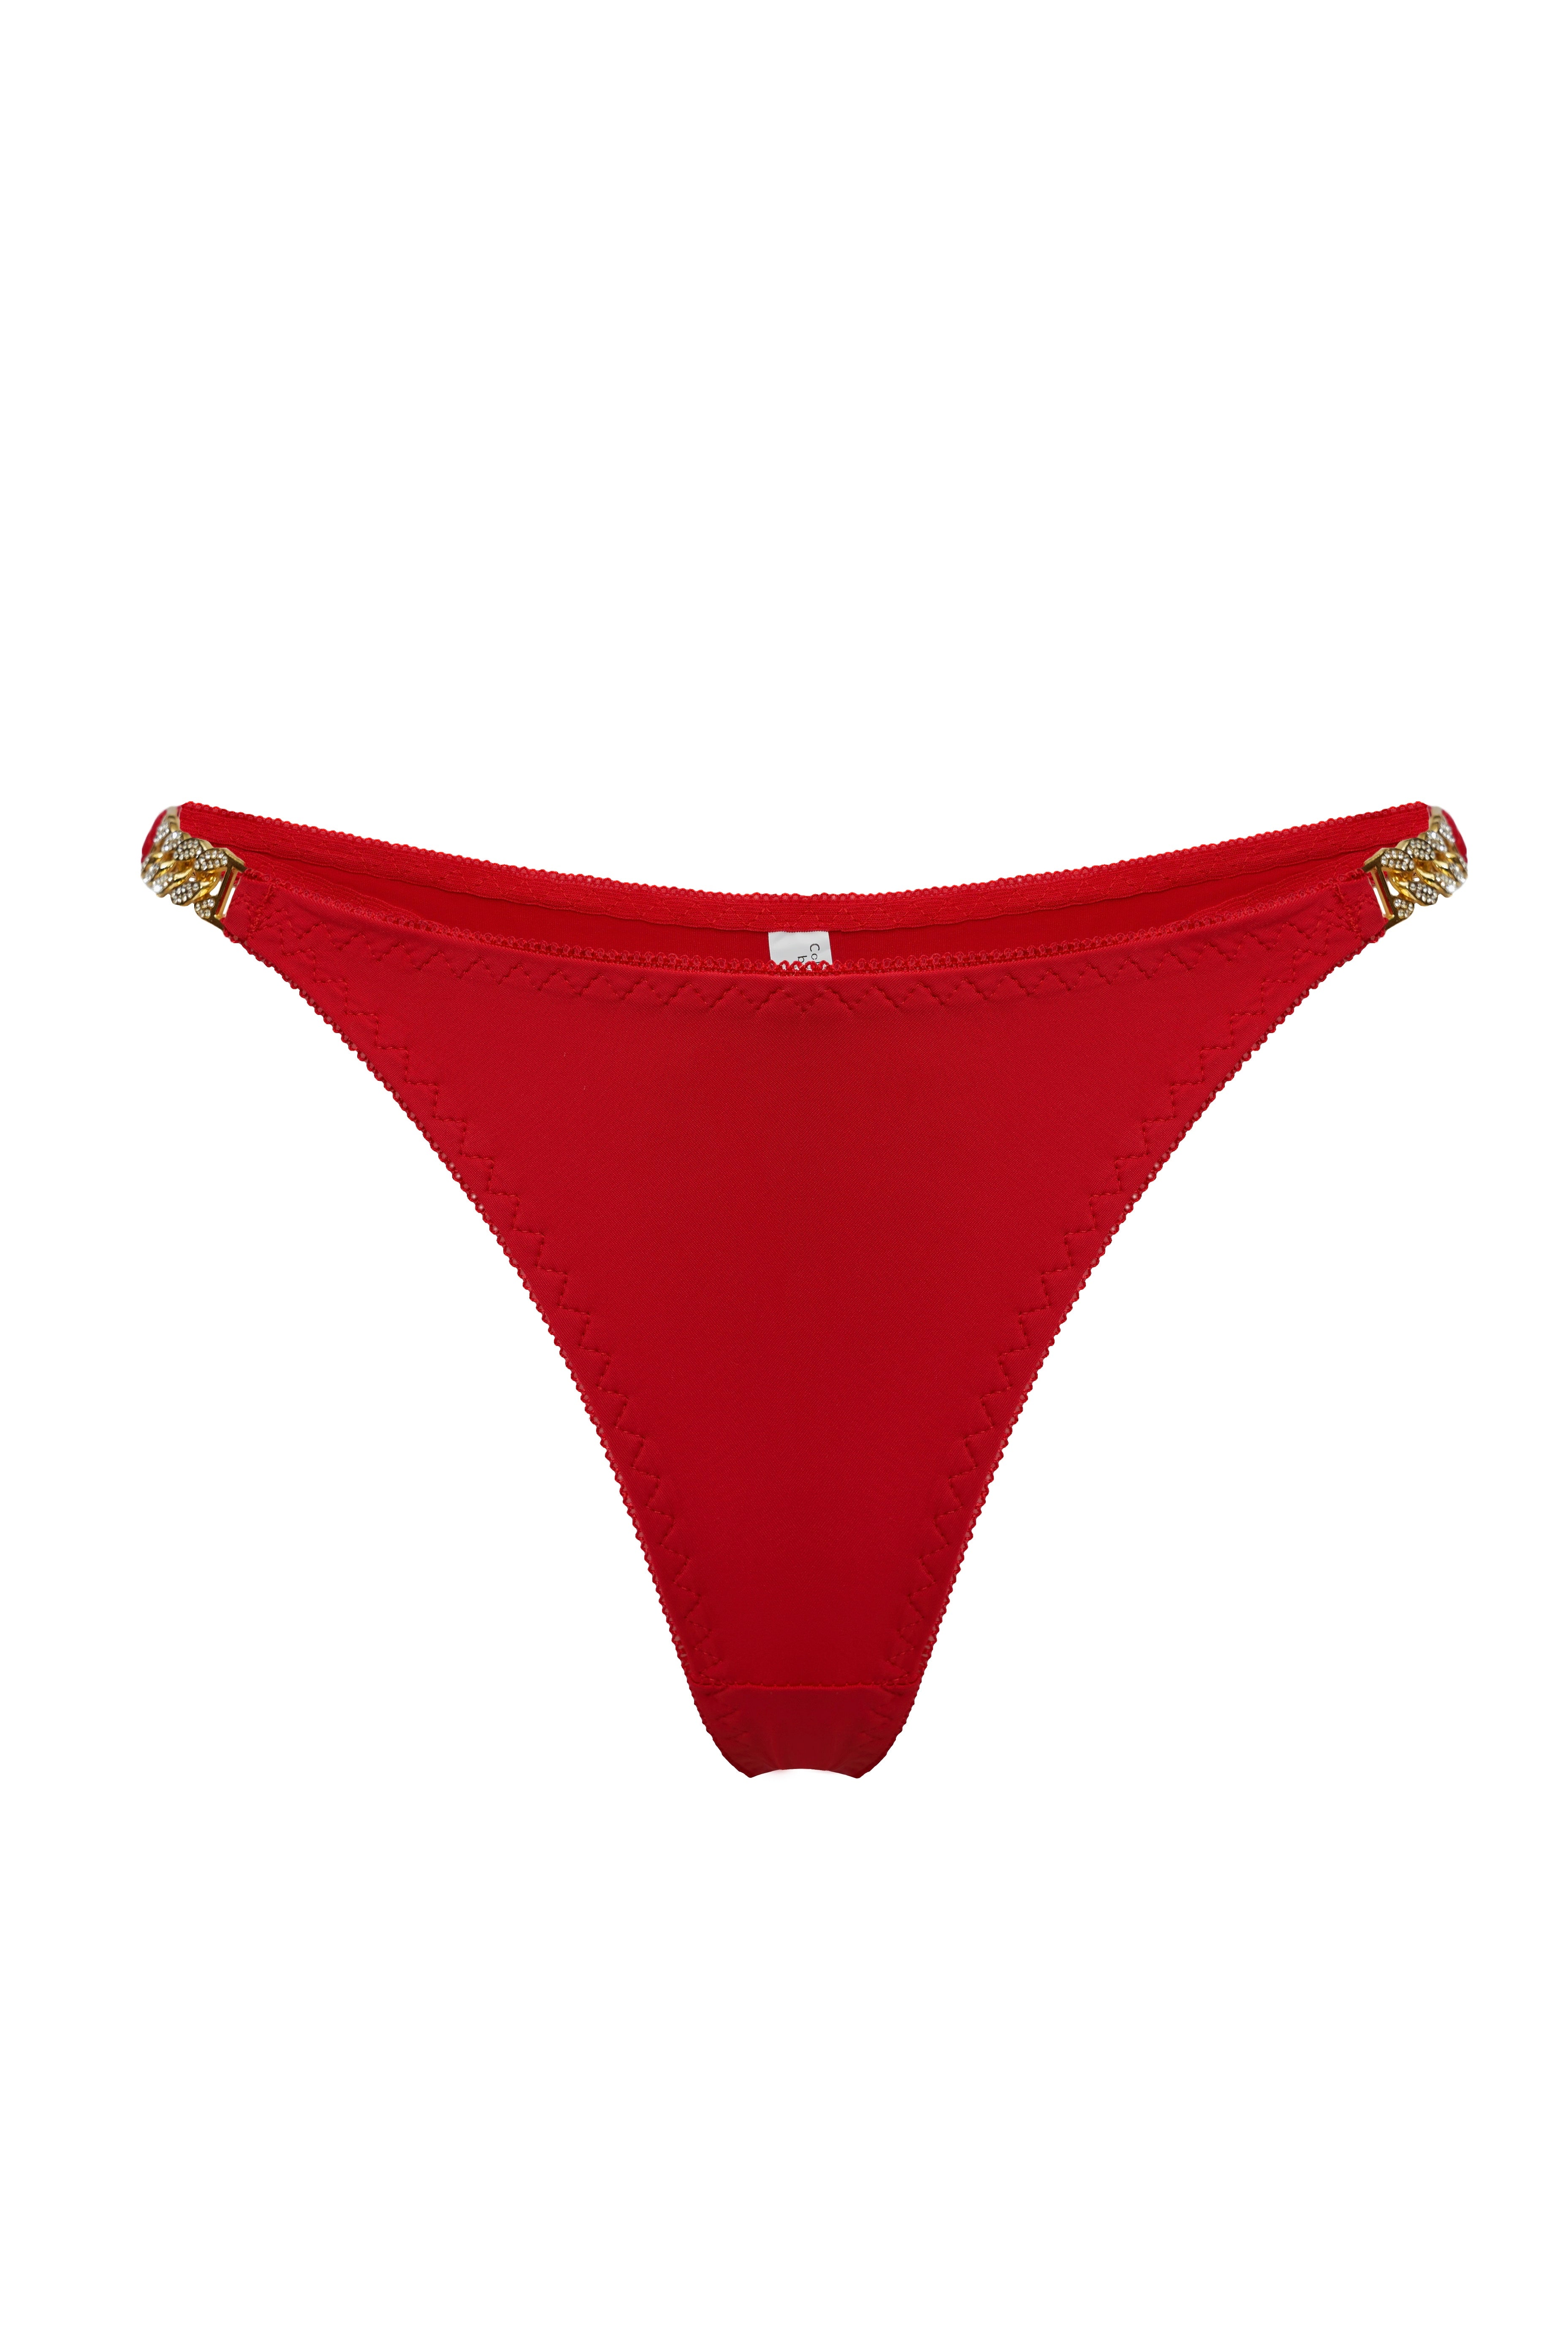 Kira red thongs with chains